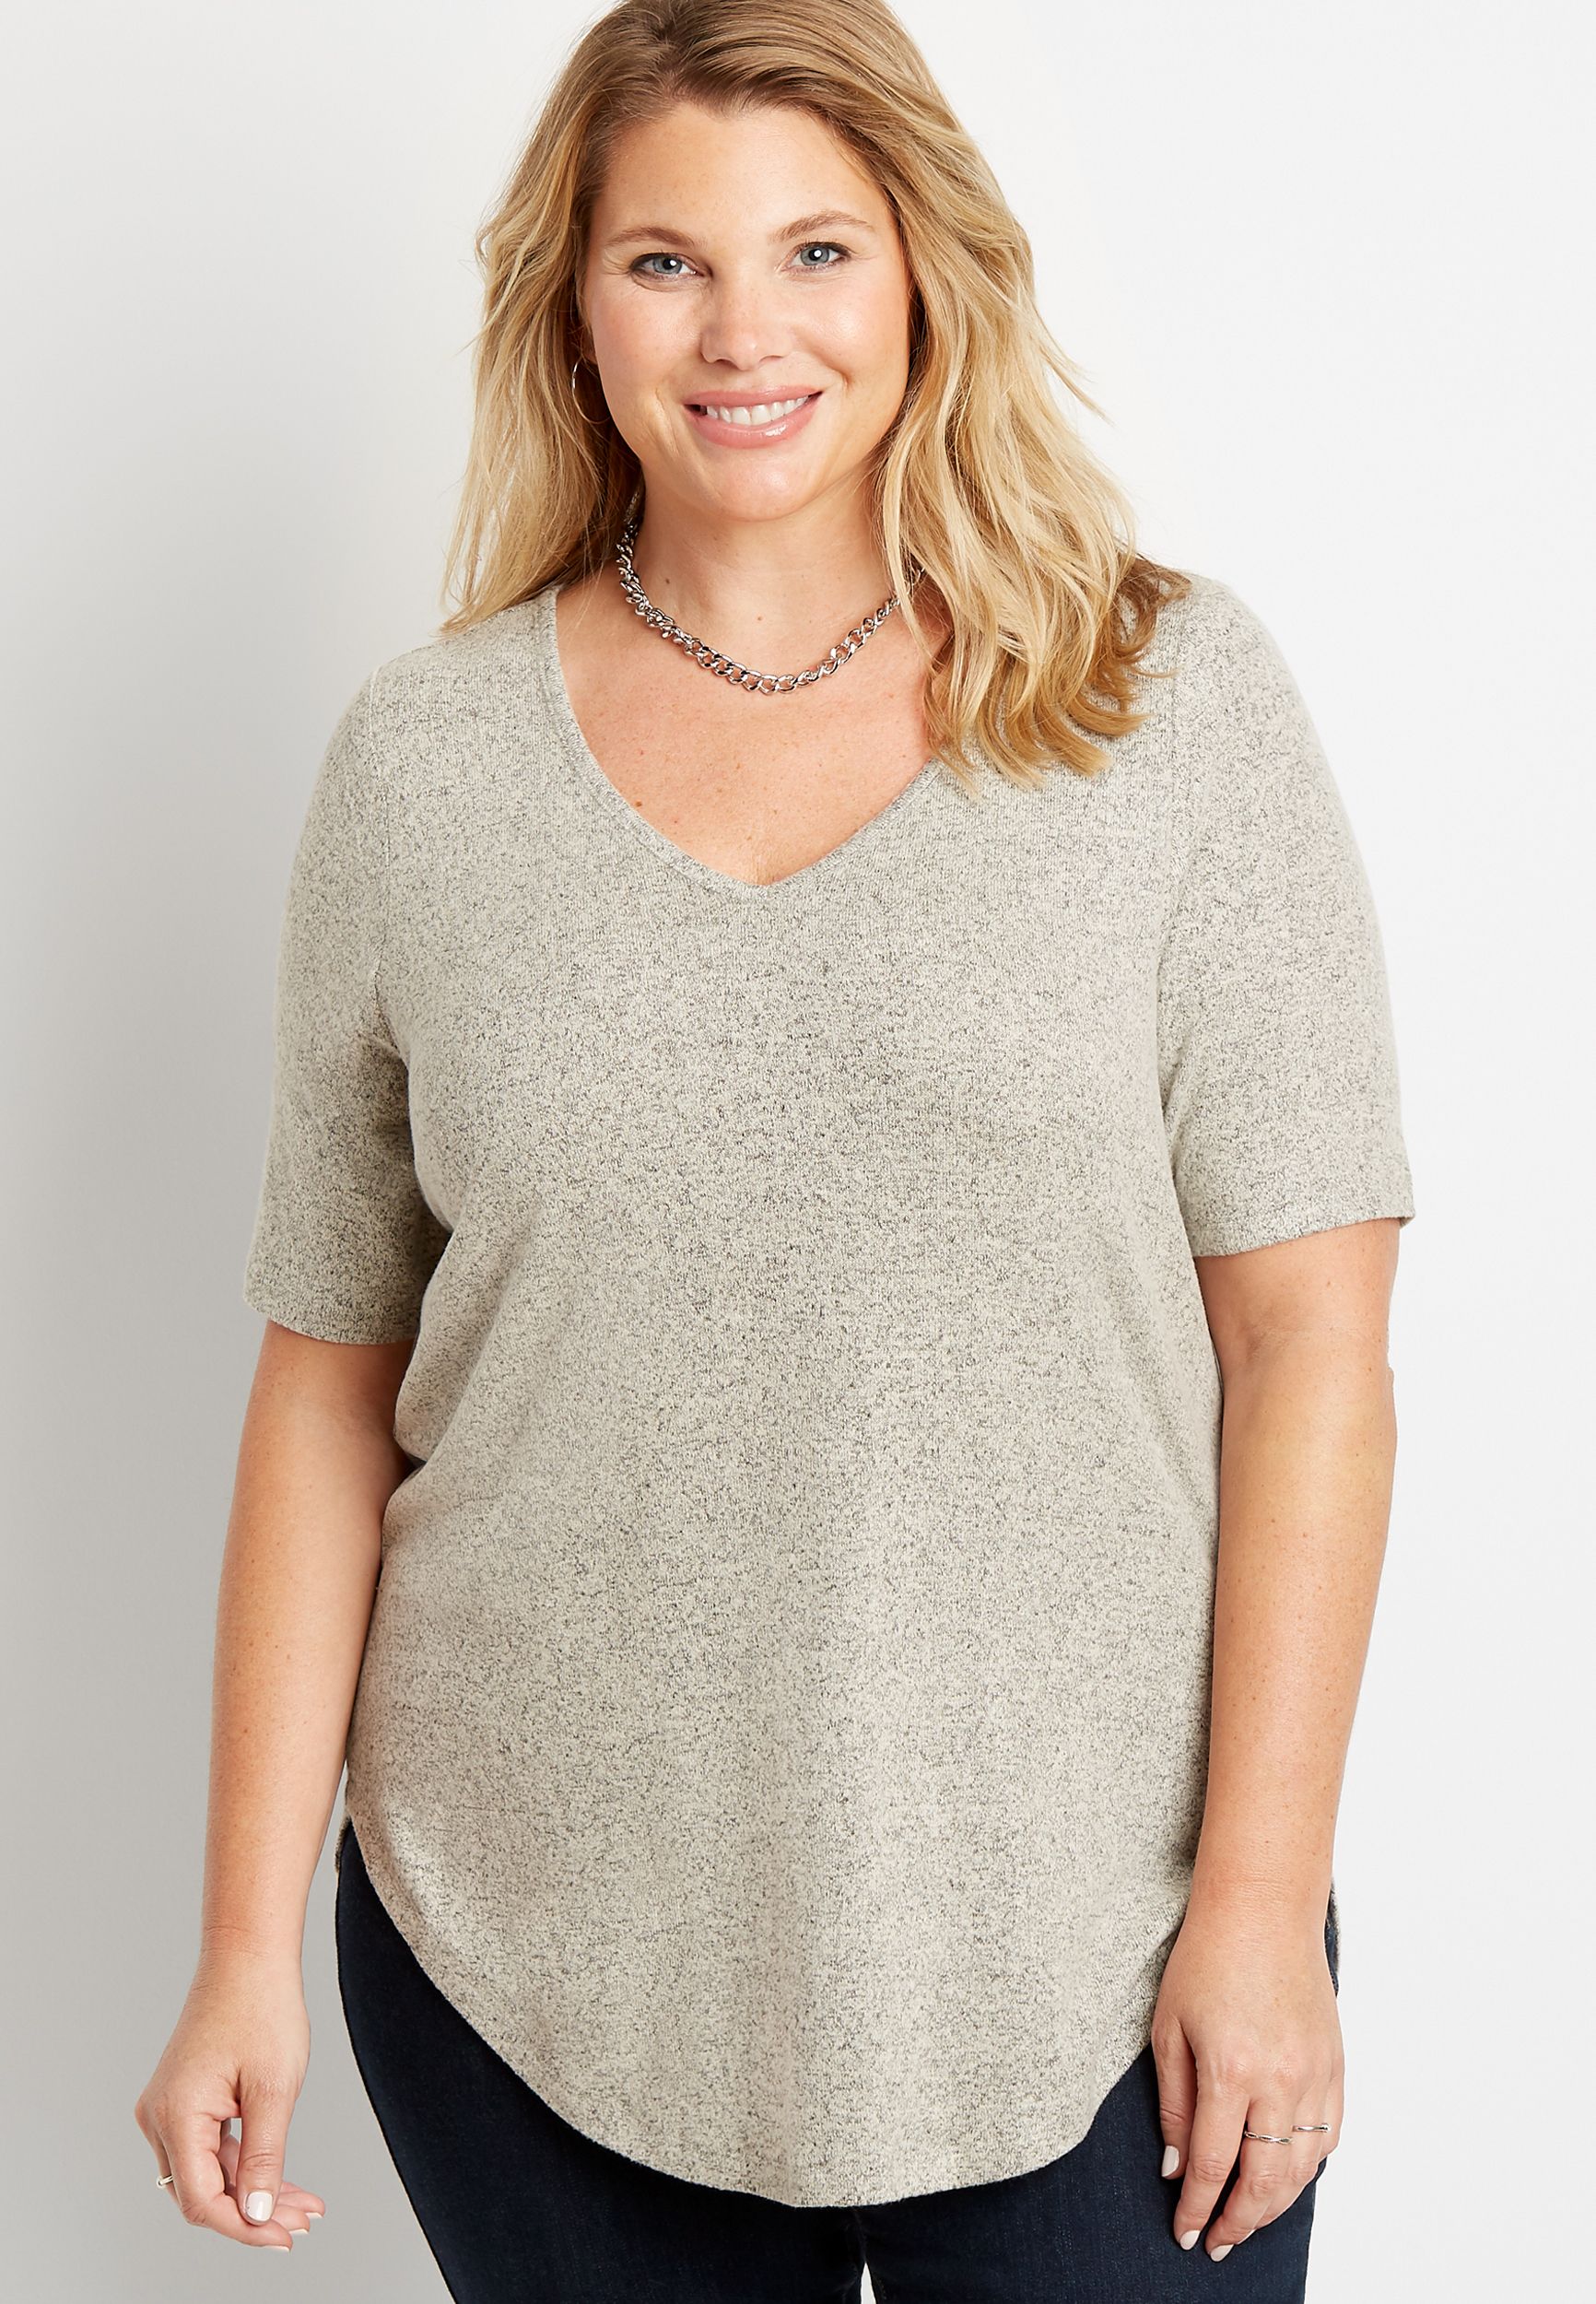 women's plus size tops clearance